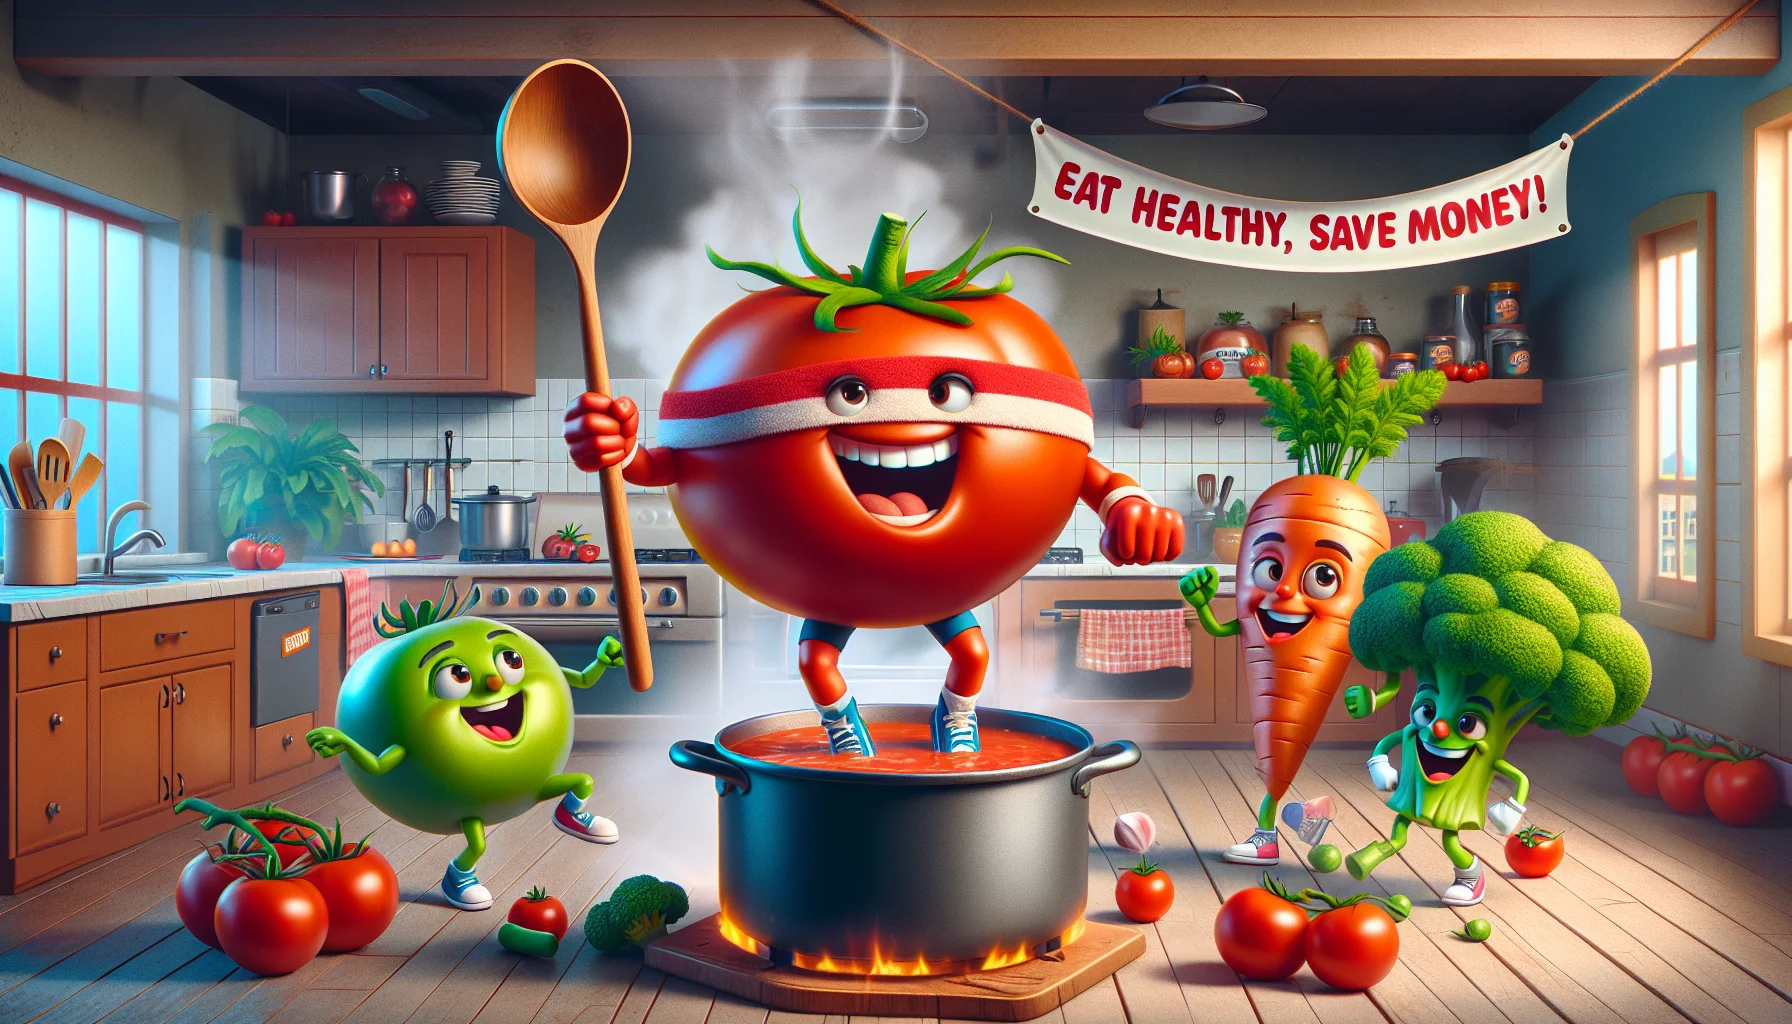 Explore a comical scene where a charismatic tomato, dressed as a fitness guru, is showing off the benefits of tomato soup. The animated tomato stands energetically in a fully equipped kitchen with a large pot of steaming tomato soup, brandishing a wooden ladle as if it were a fitness instructor's baton. A hippie-looking carrot, an athletic broccoli, and a cunningly cheerful onion are among the other various veggies in workout attire, cheerfully following the tomato's advice. Over the scene hangs a banner stating, 'Eat Healthy, Save Money!'